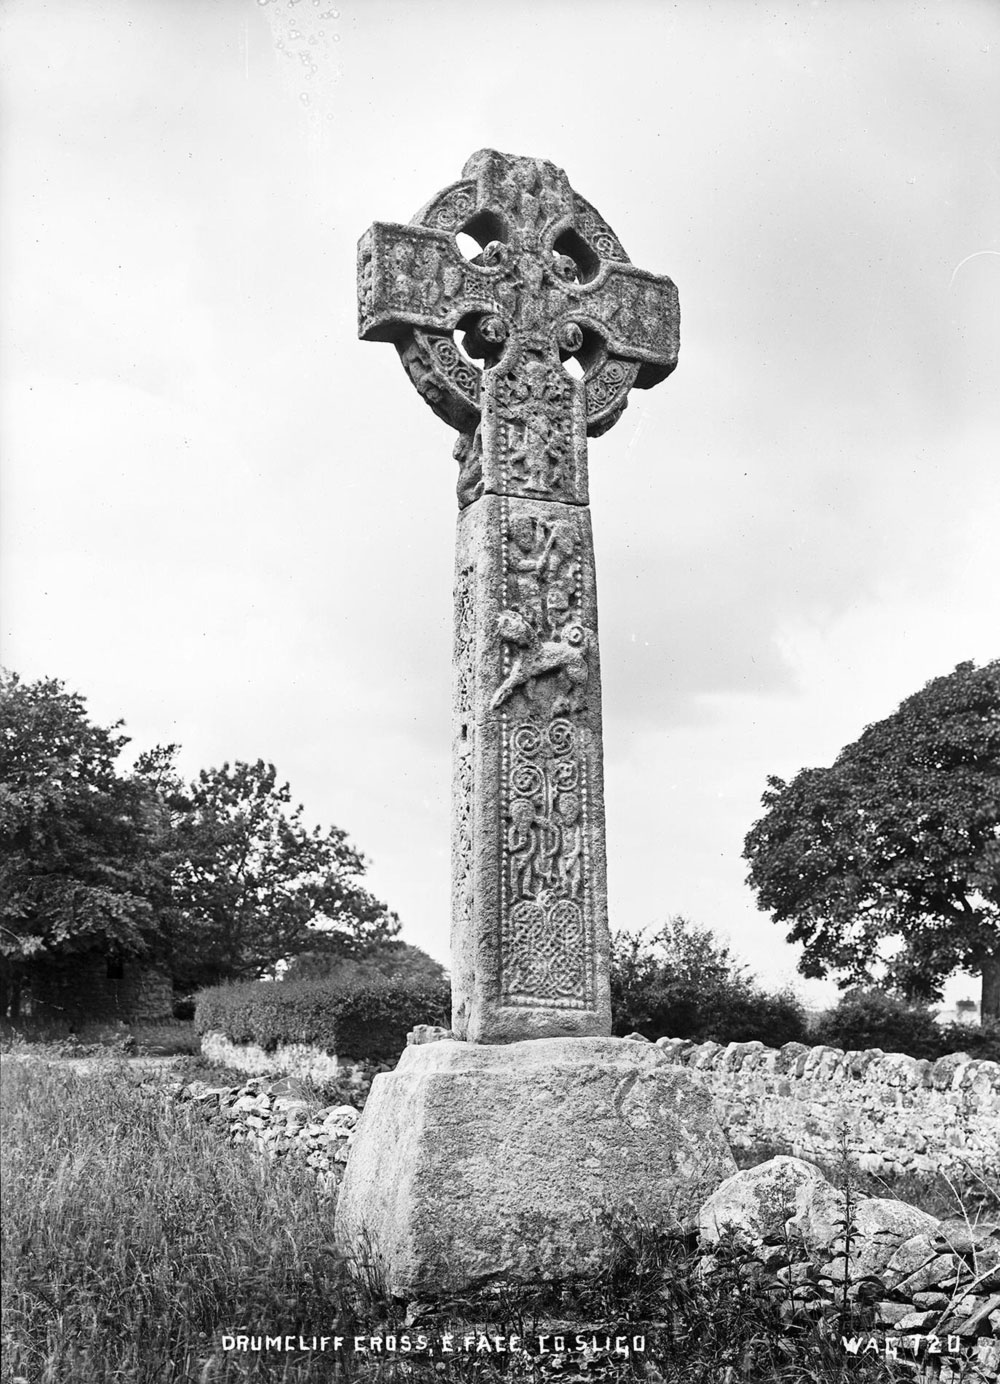 Decorated stone at the Knockmany passage-grave. Photograph by Robert Welch, © NMNI.